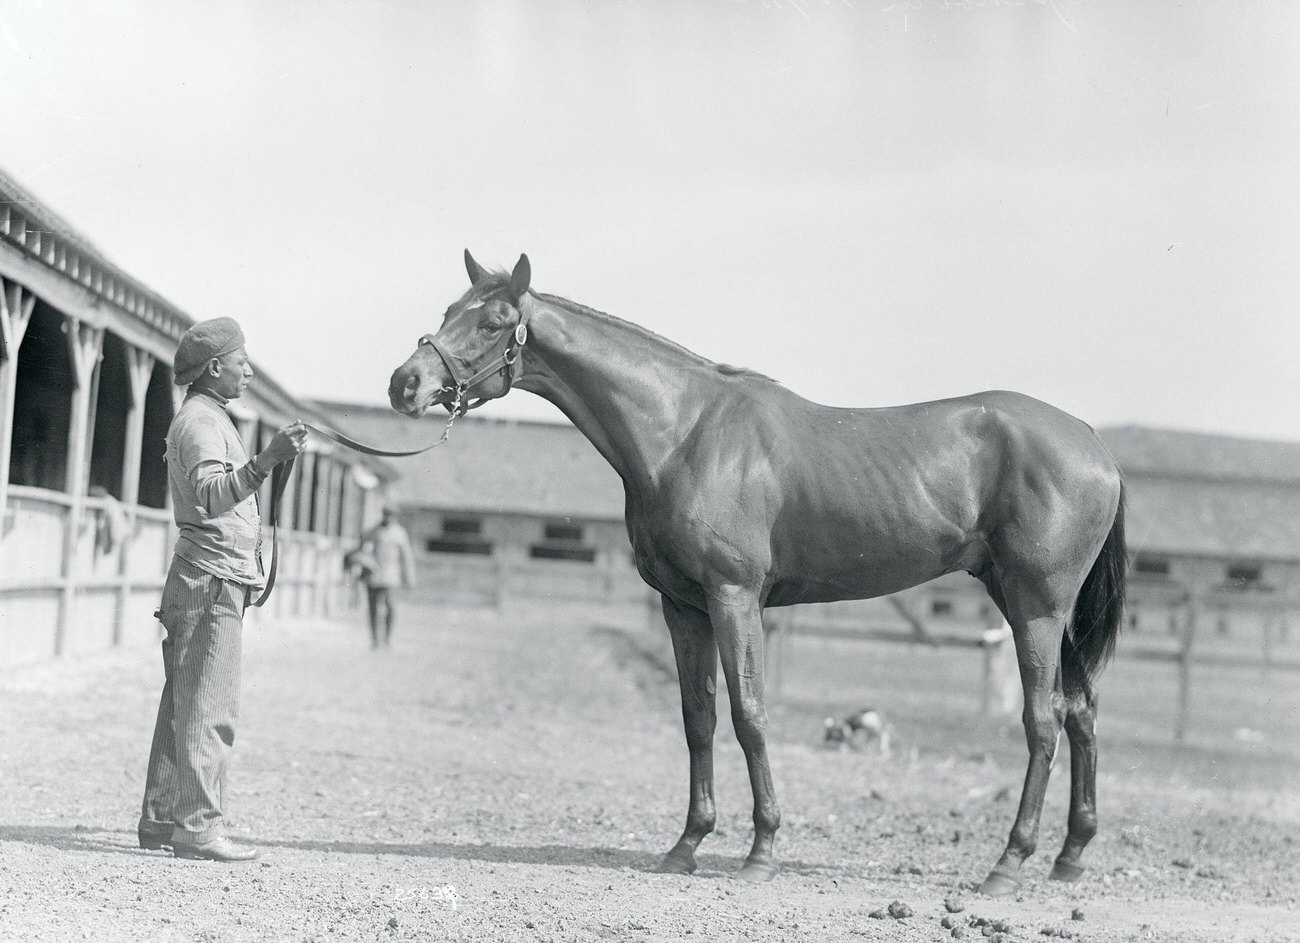 Racehorse Posing With Stable Worker, &Amp;Quot;Sharpshooter,&Amp;Quot; March 24, 1915.